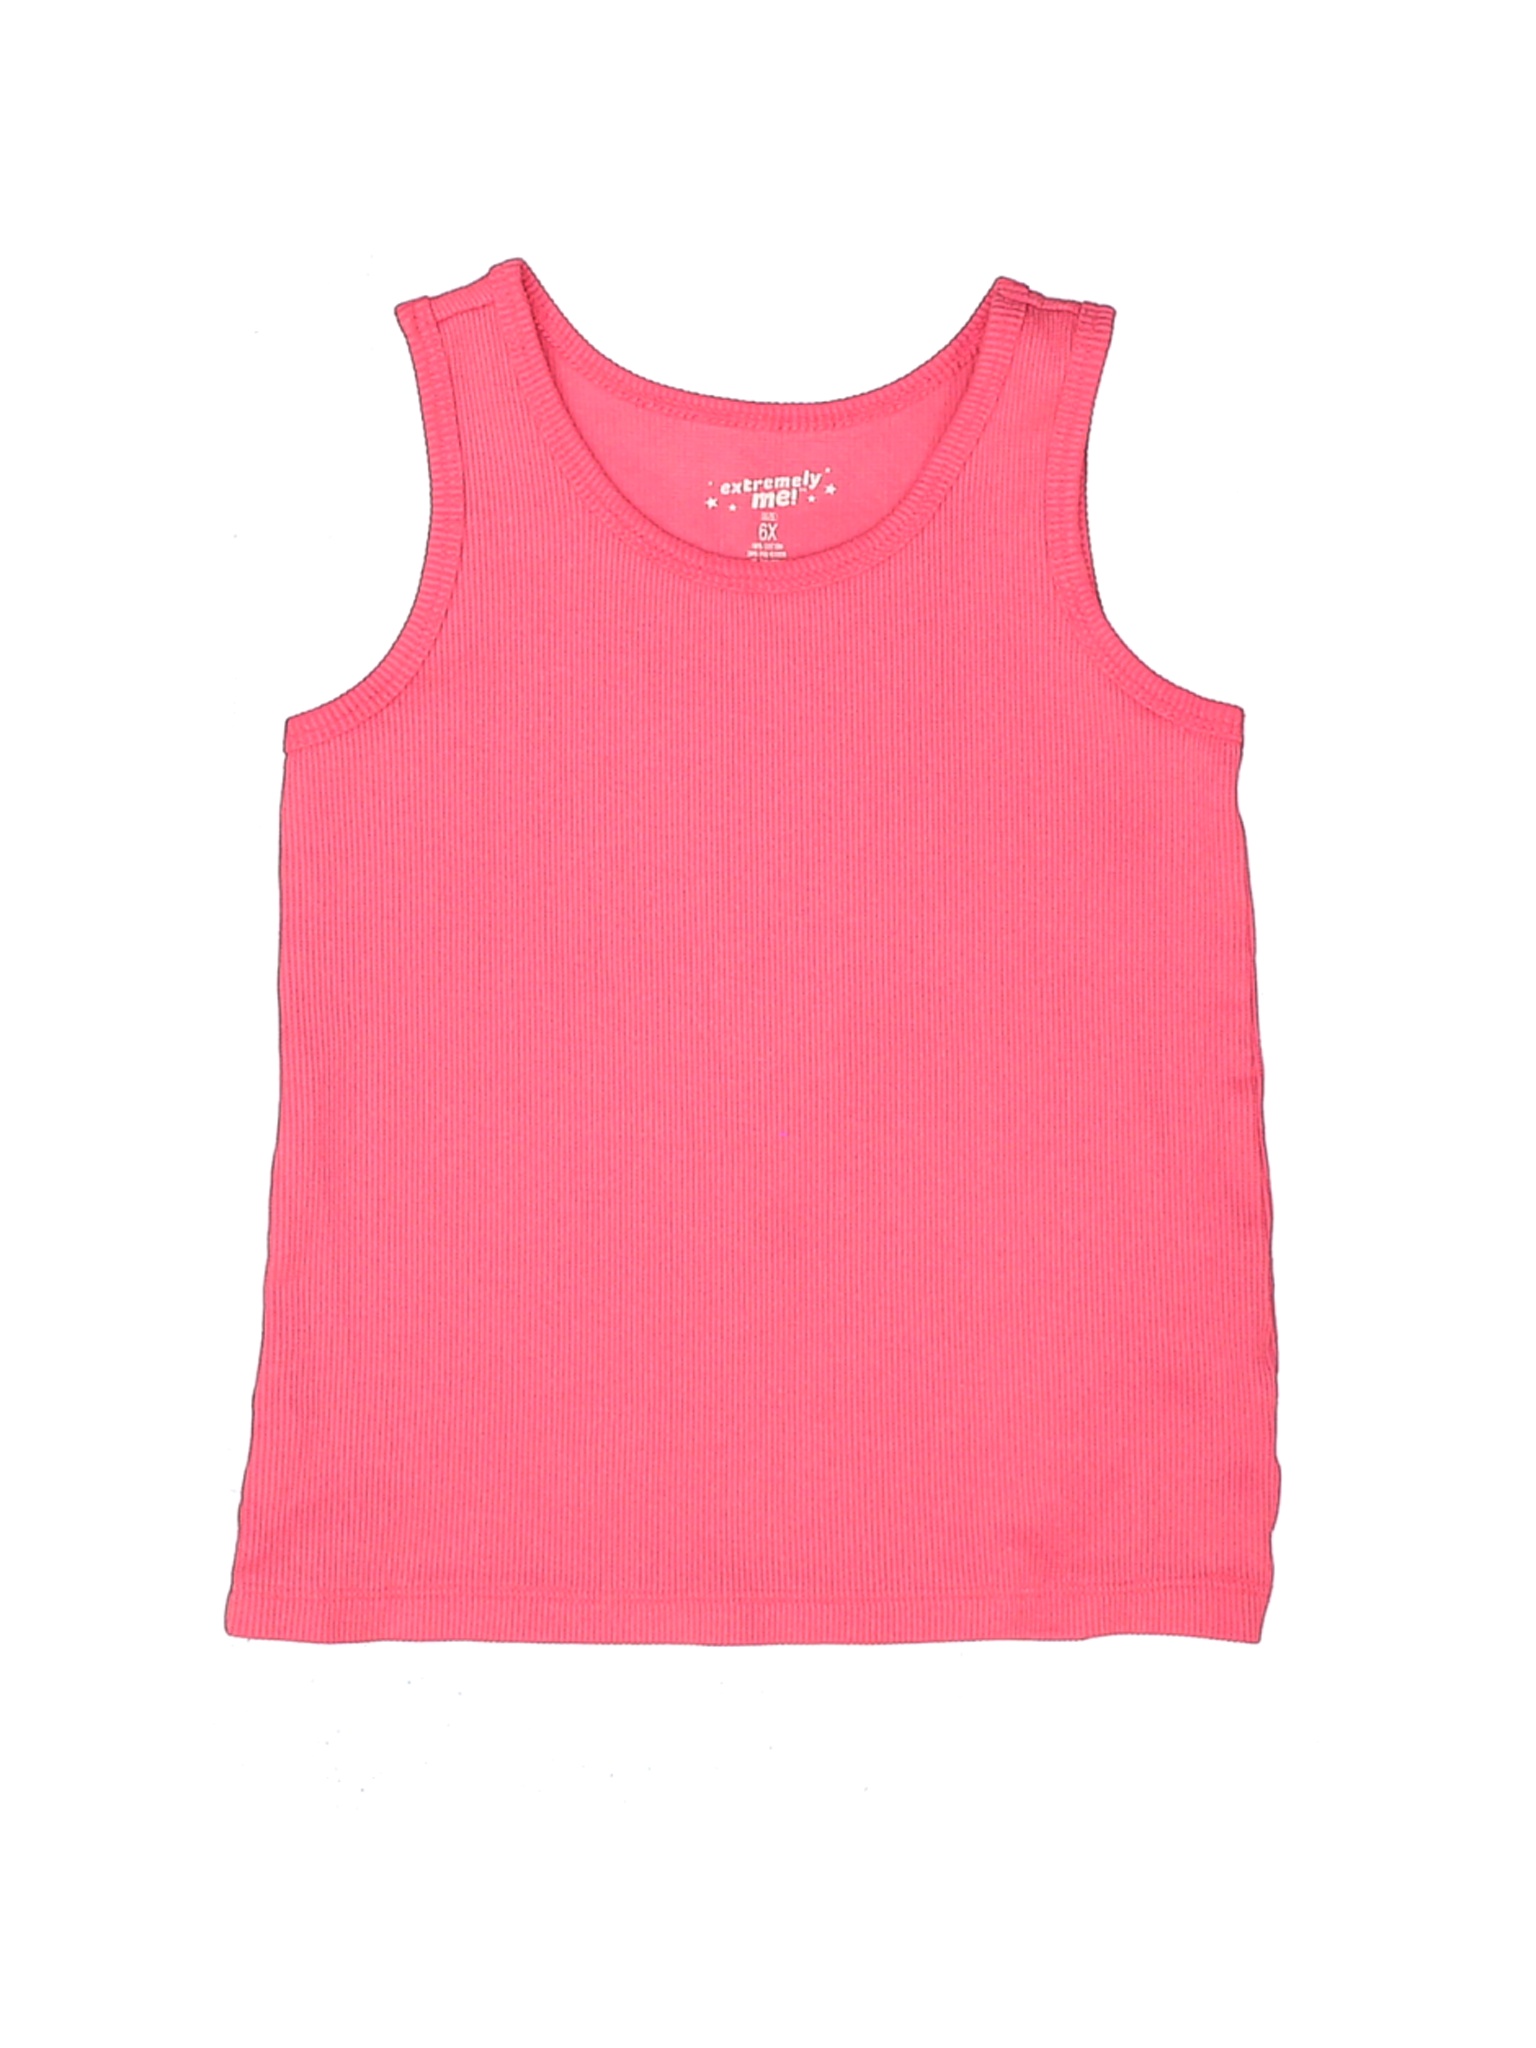 Extremely Me Girls Pink Tank Top 6X | eBay